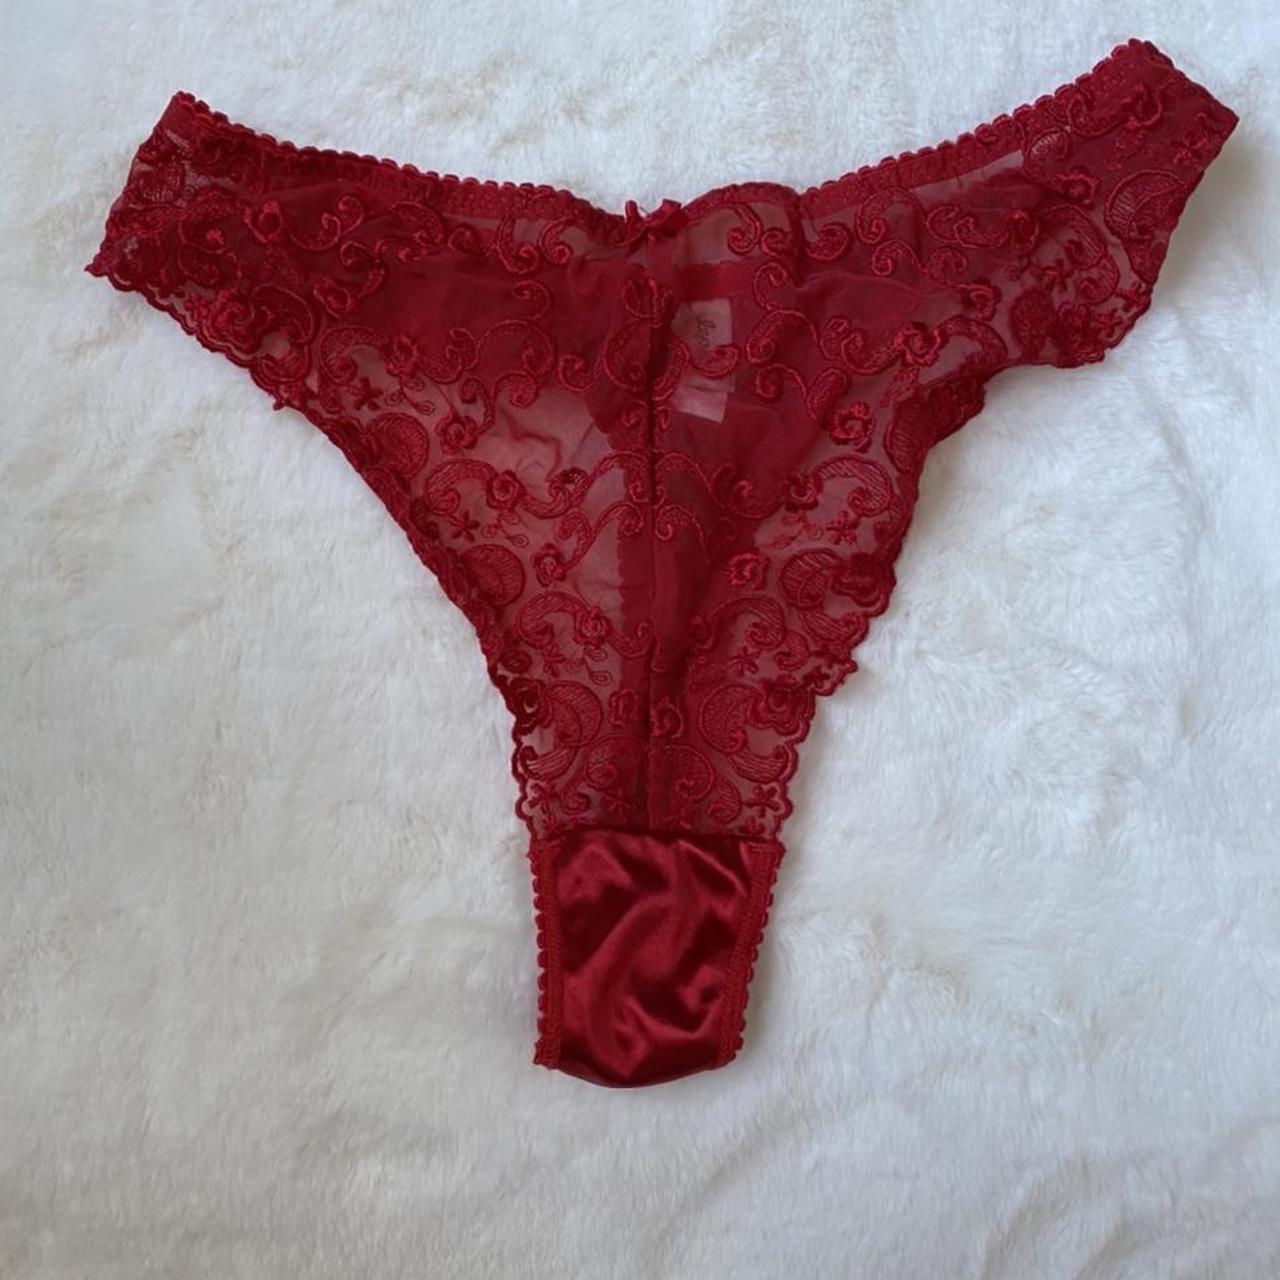 Cherry Red Satin and Lace Thong. Completely new and... - Depop